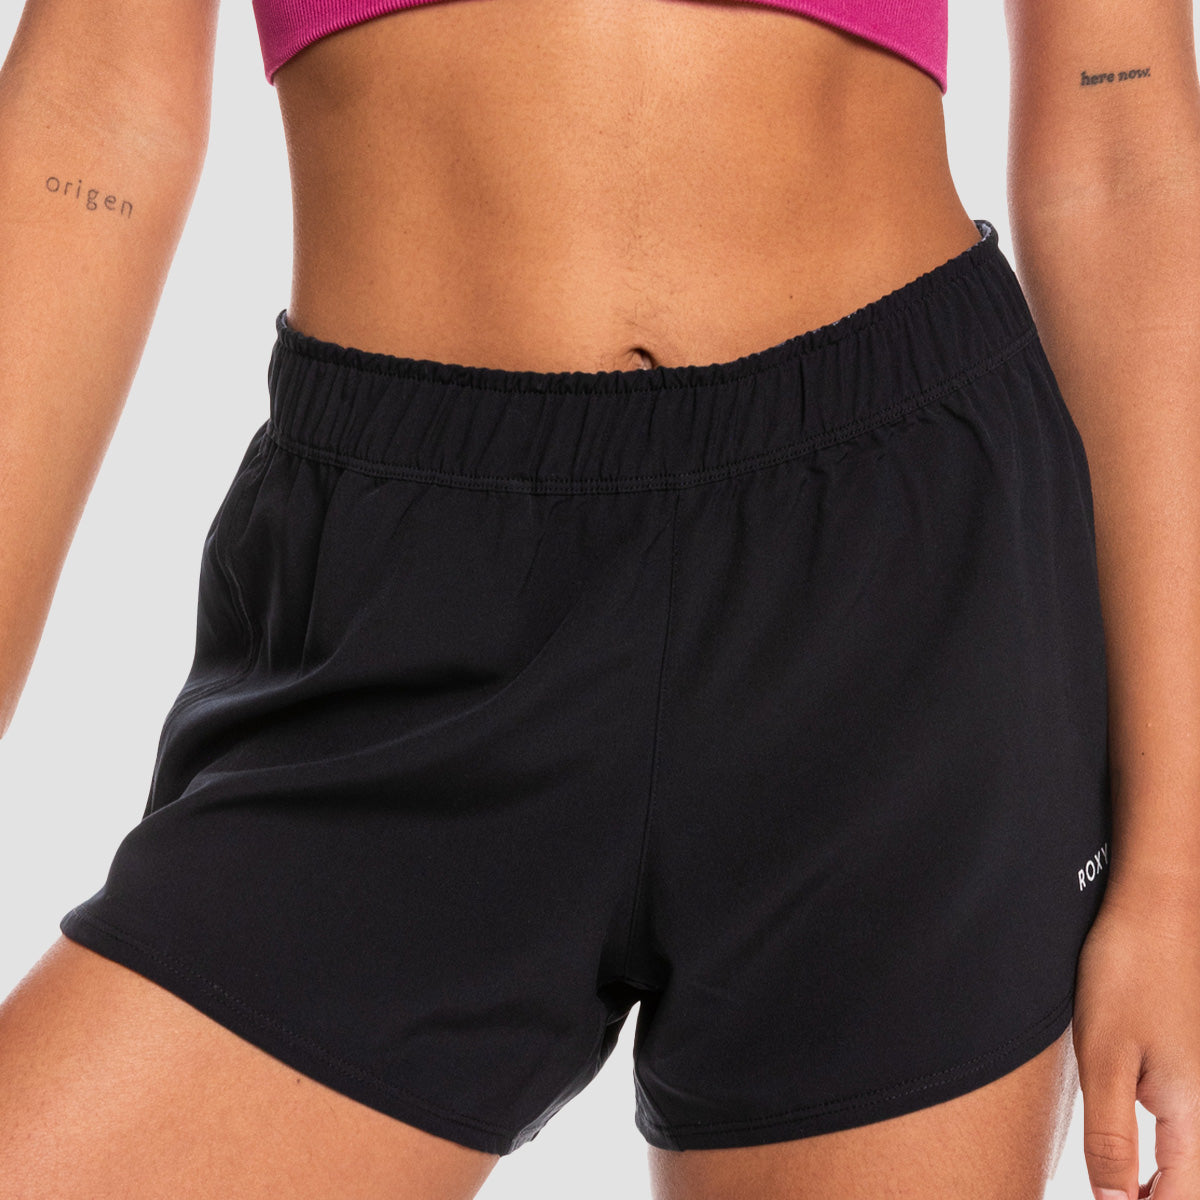 Roxy Corsica Calling Workout Shorts Anthracite - Womens